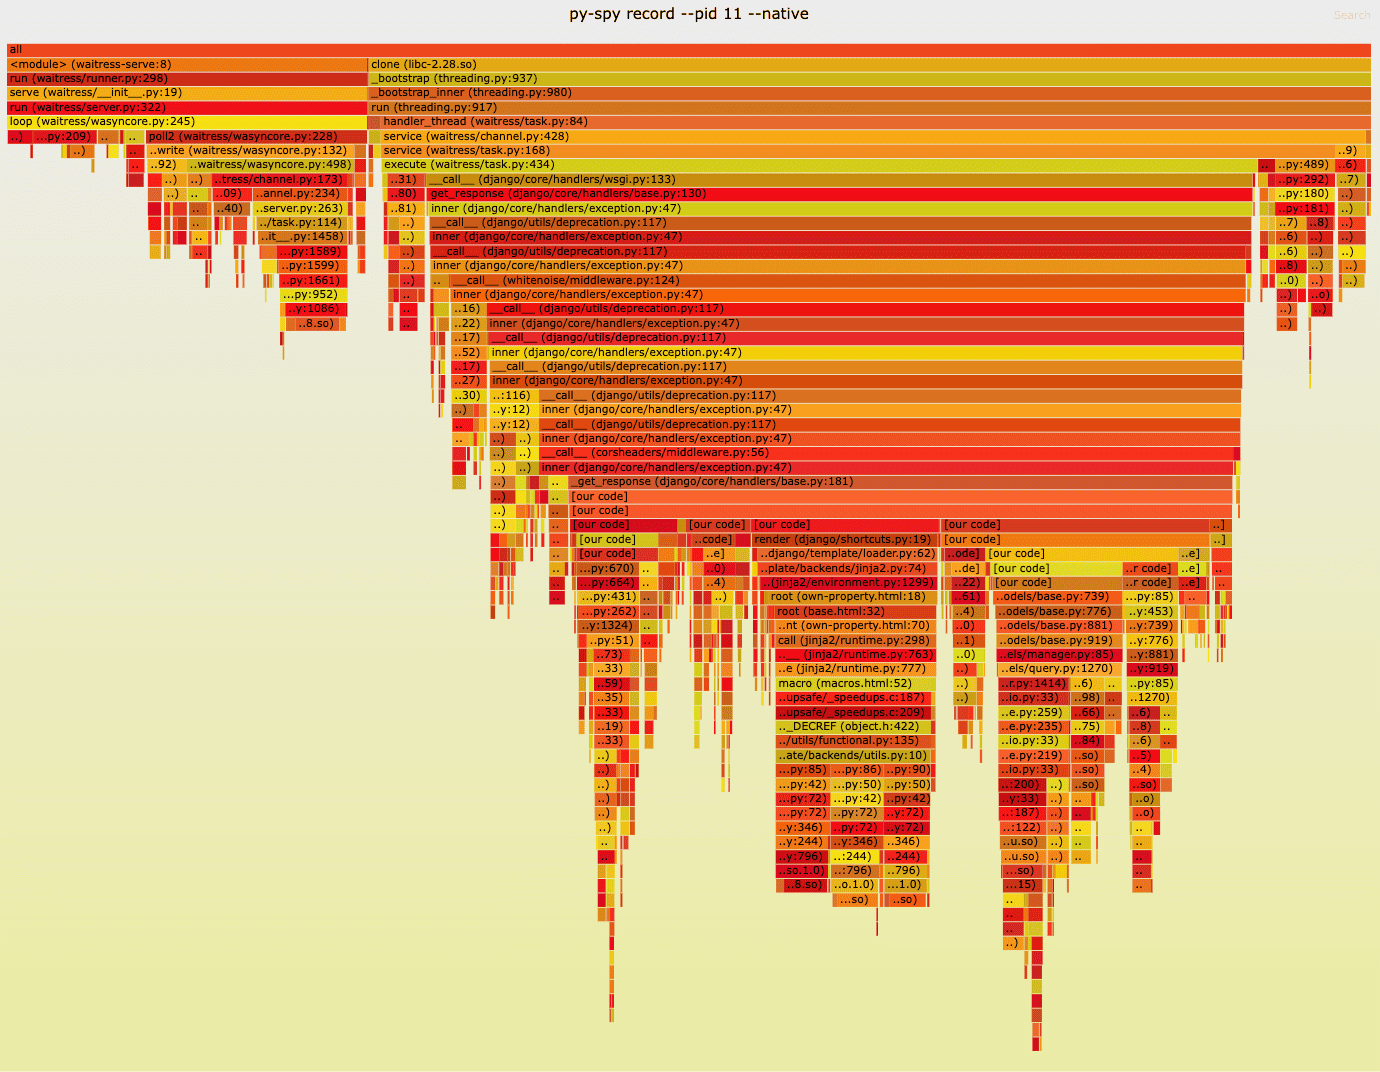 This image is a flame graph representing the performance profile of a software application. It is primarily colored in gradients of red, orange, and yellow, with various shades indicating different levels of resource consumption. The vertical axis represents the stack depth, where each block represents a function in the call stack at a moment in time; the wider the block, the more time the program spent in that function. Text labels overlay the blocks, indicating function names, with some labels mentioning 'waitress', 'pyramid', 'bootstrap', and 'our code'. The image is complex, with many overlapping layers of blocks and text, suggesting a detailed profiling session designed to diagnose performance issues or bottlenecks within the software.